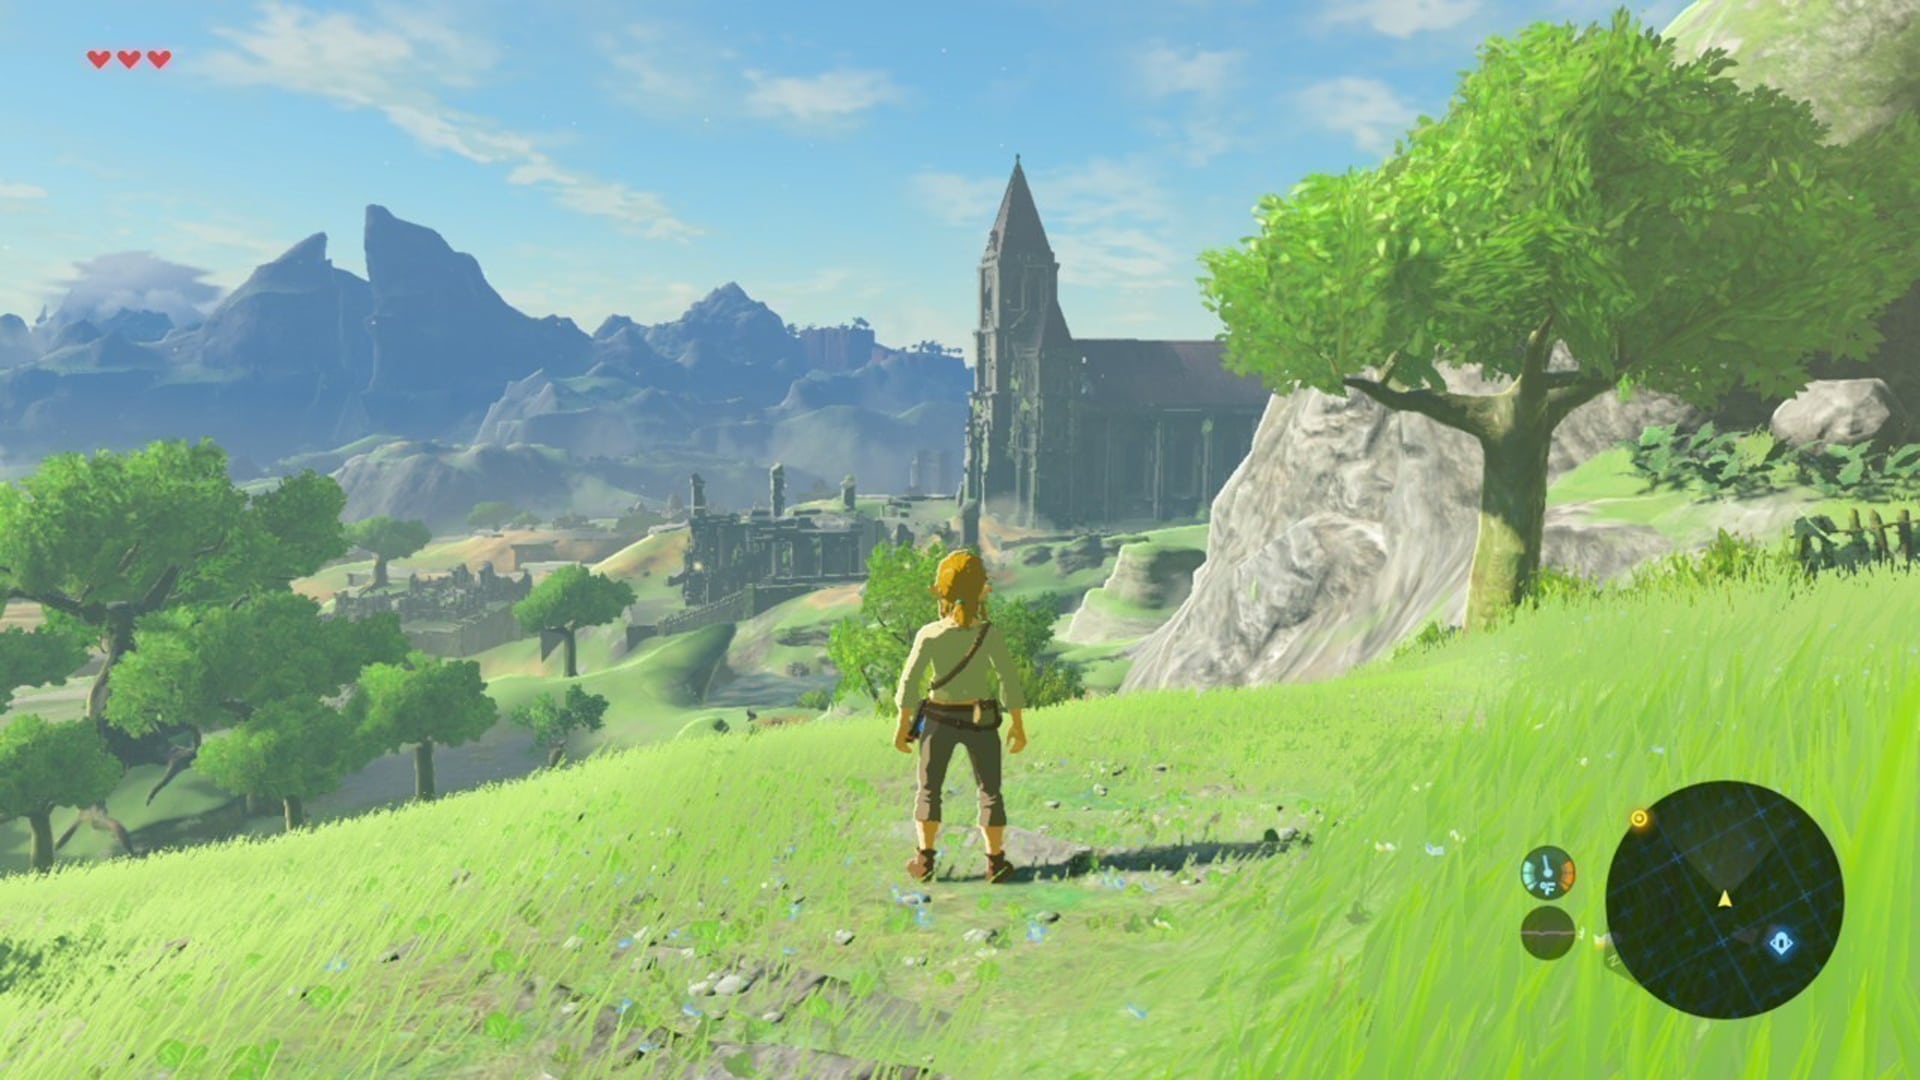 Finally, I'm standing in Hyrule. Only what now? Where am I supposed to go? Why is everything so different from before?